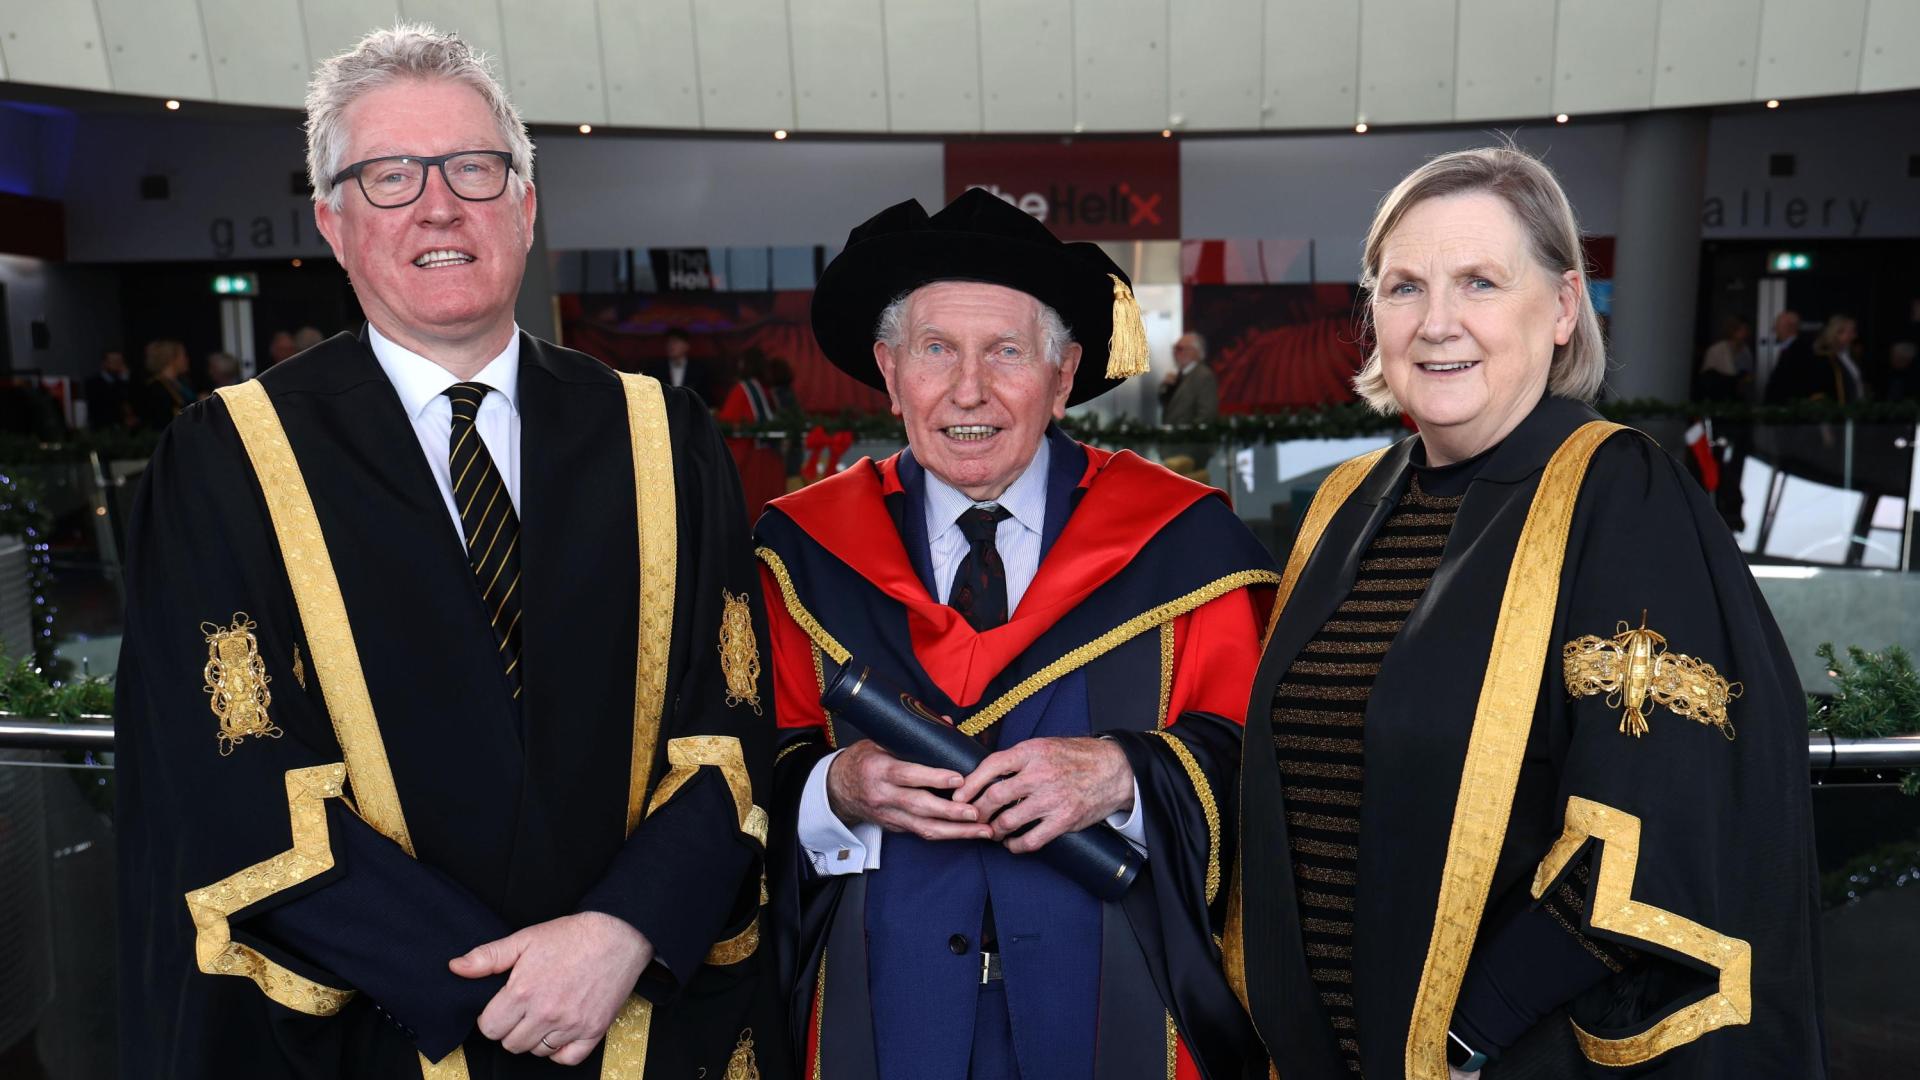 Shows Professor Daire Keogh, President of DCU, Dr Kenneth Milne, and Brid Horan, Chancellor DCU 